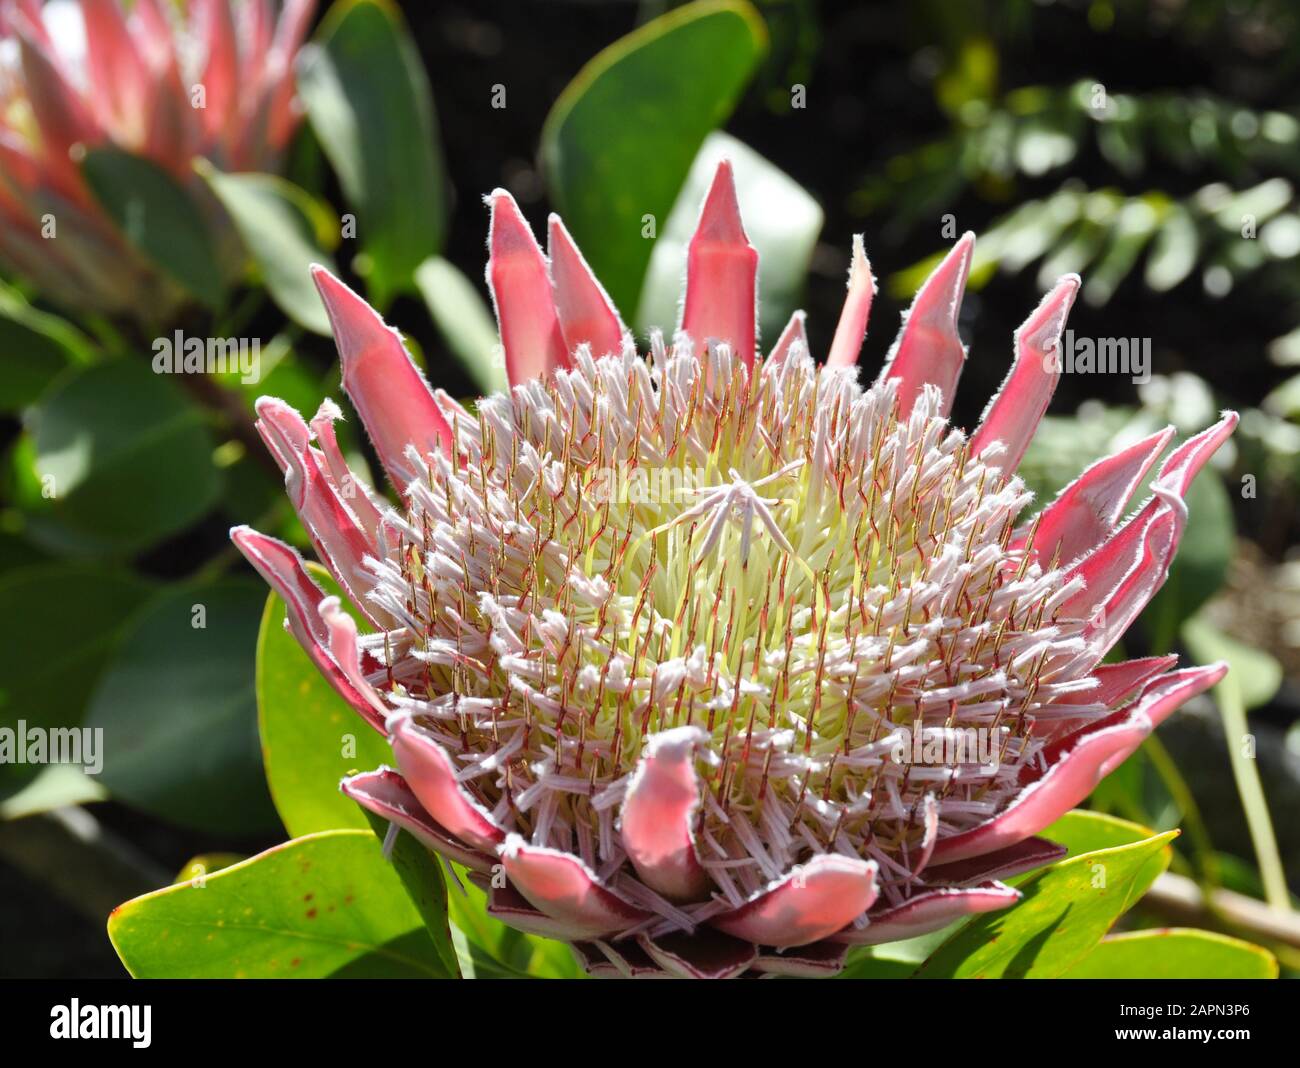 Closeup on the flower of a Protea plant Stock Photo